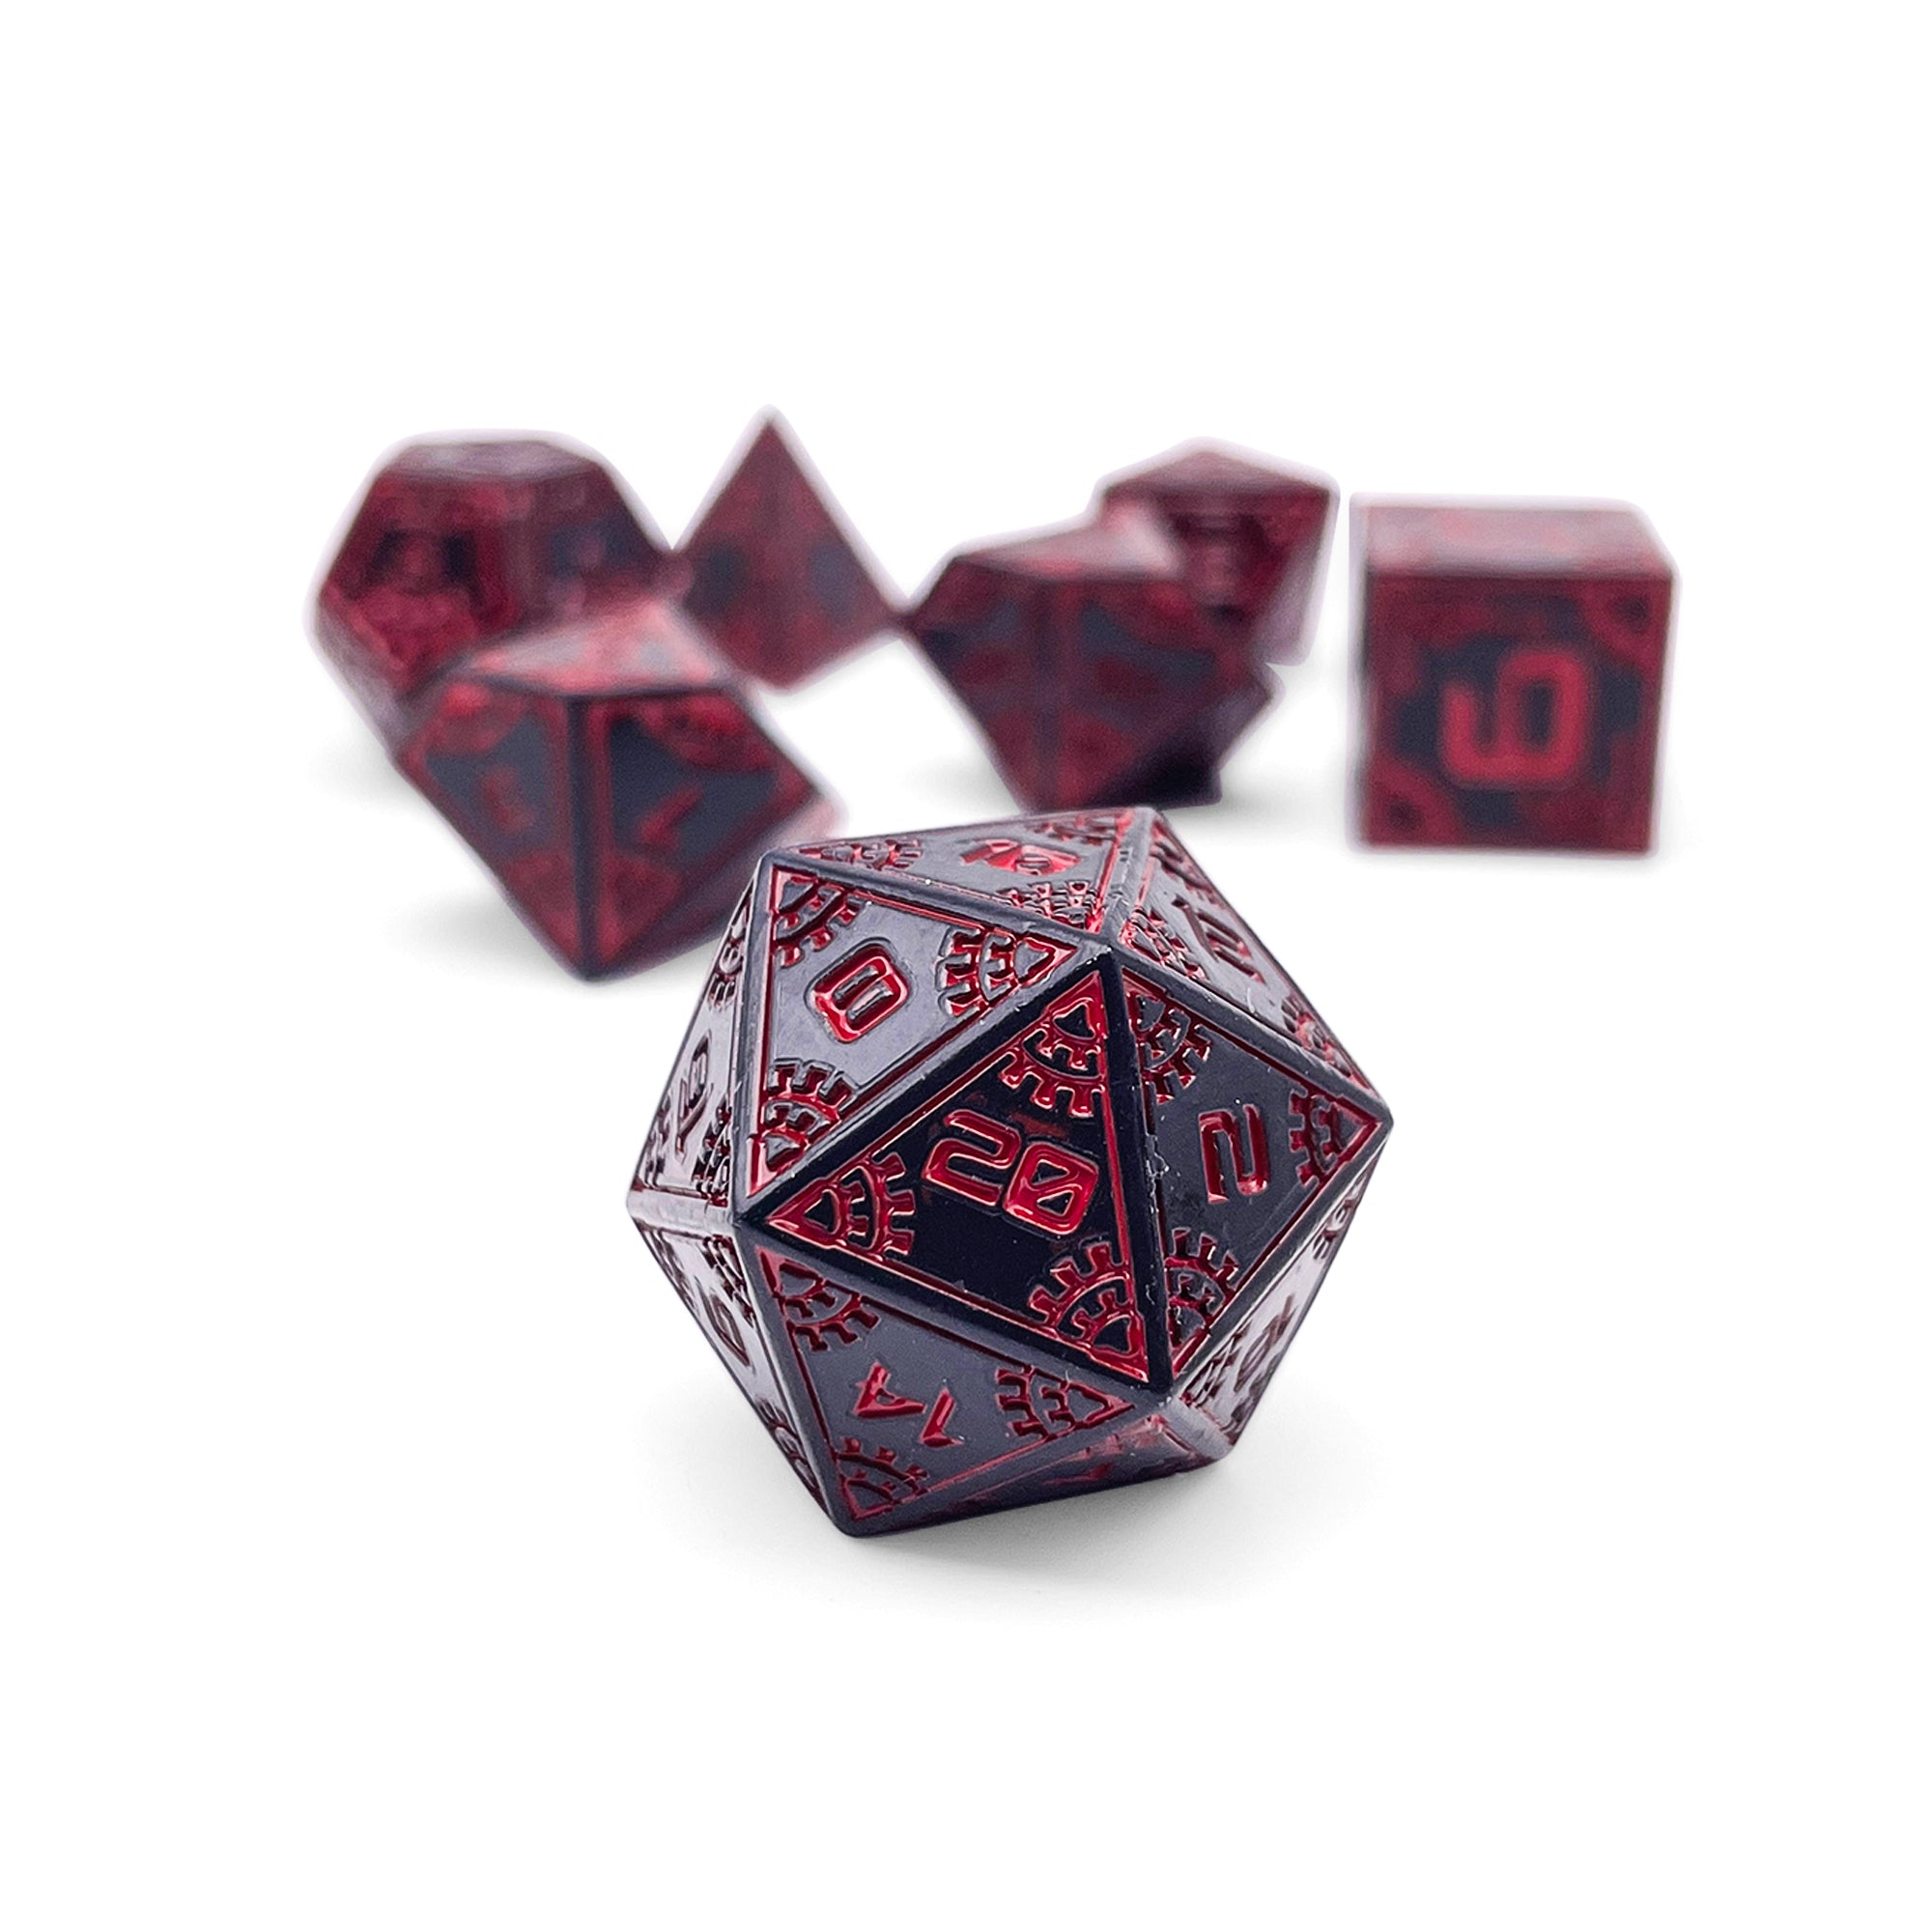 Red Giant - Space Dice 7 Piece RPG Set